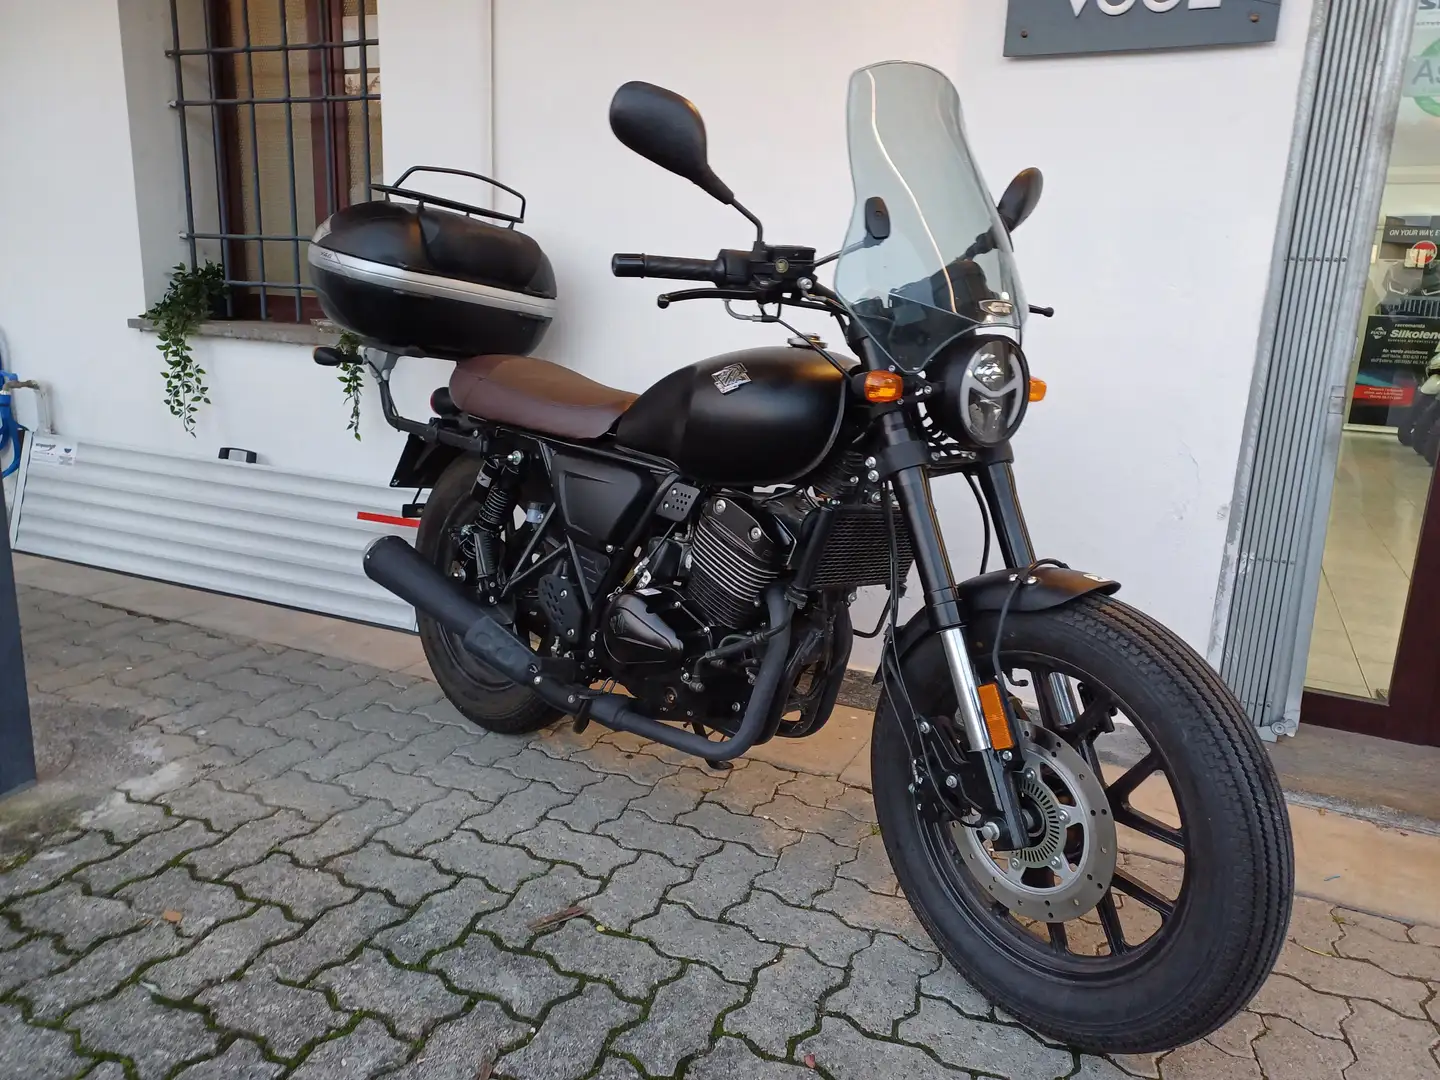 Archive Motorcycle Cafe Racer 250 ARCHIVE CAFE' RACER 250 ANNO 2021 KM 7350 Nero - 2